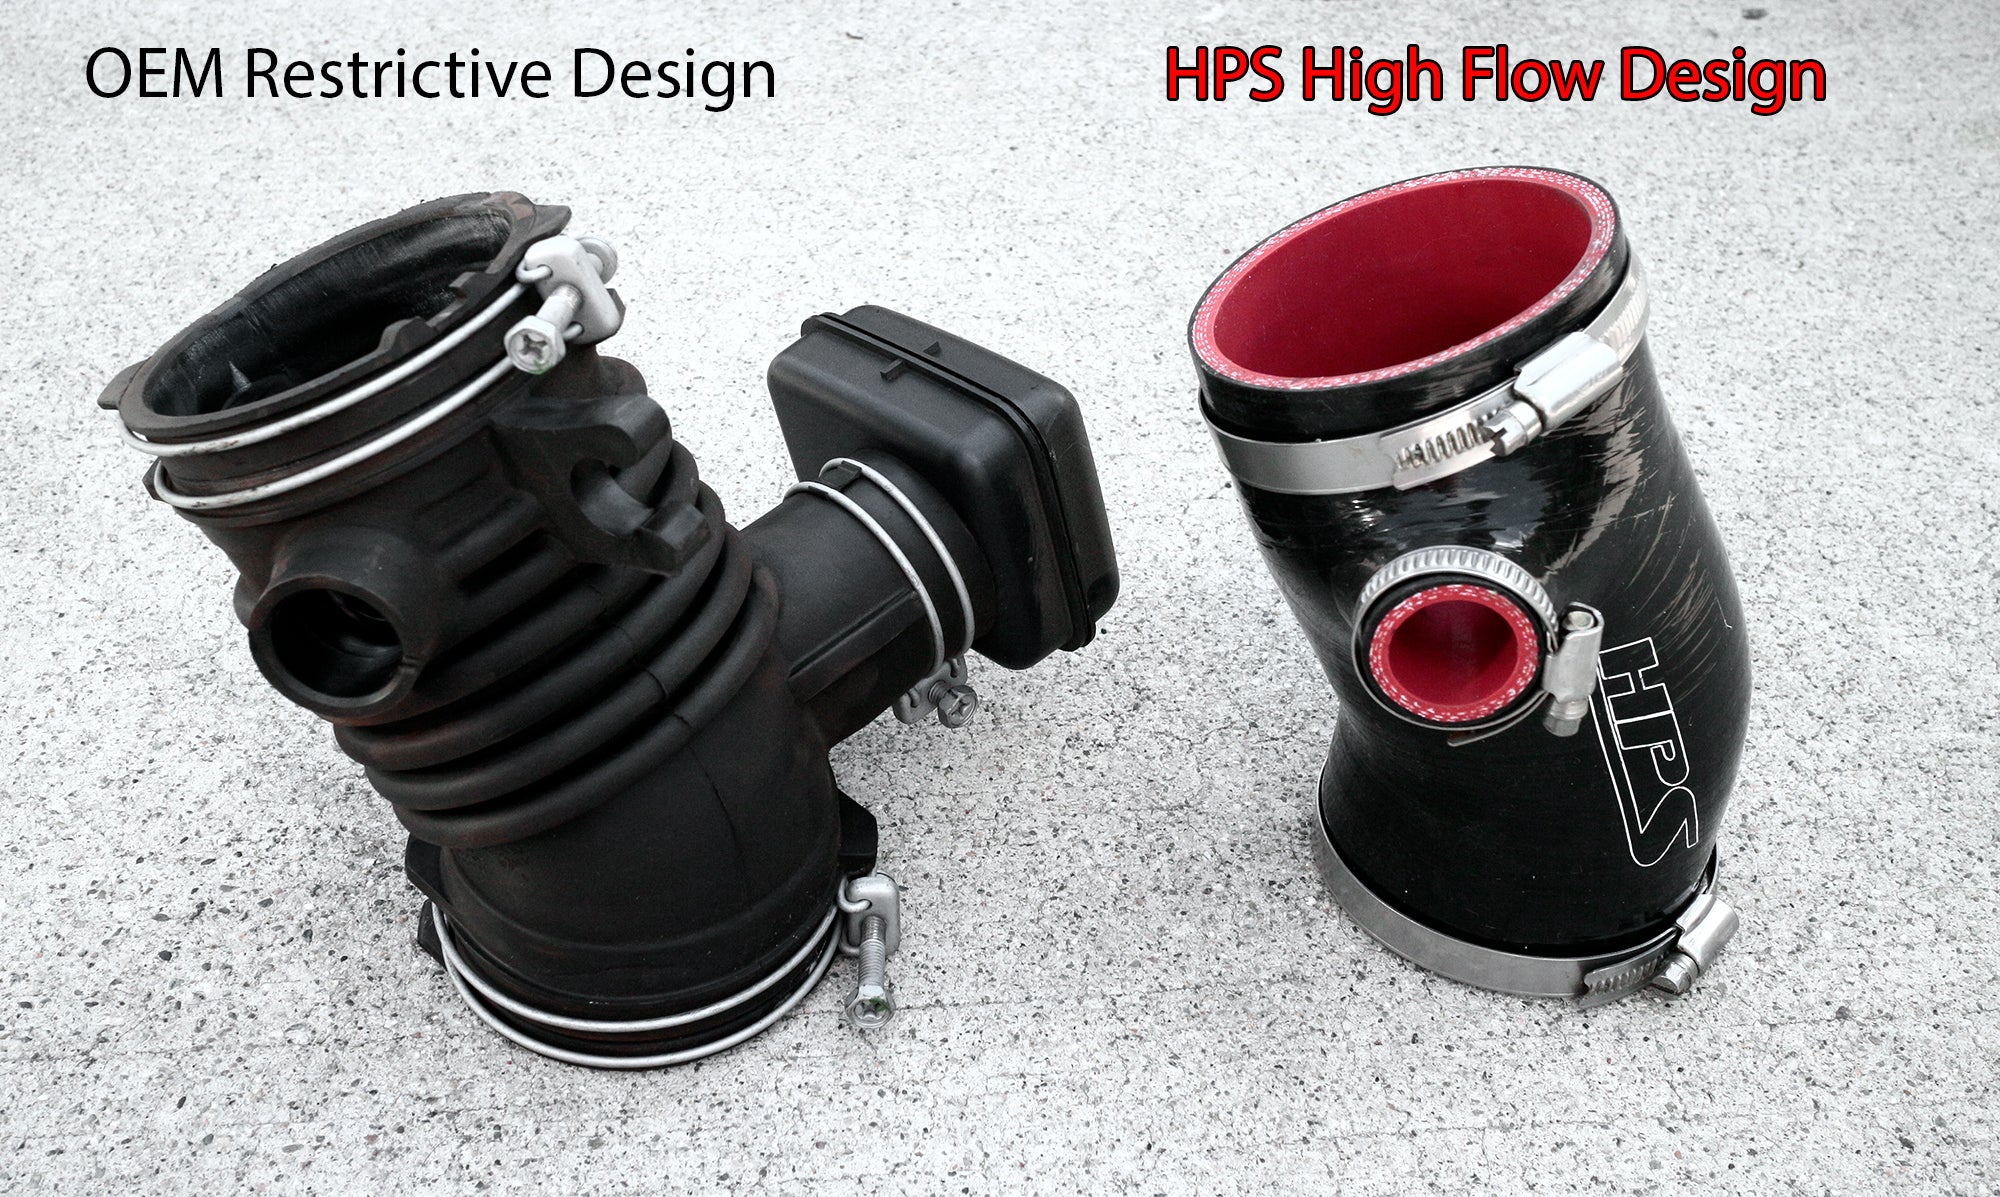 HPS Silicone Air Intake Hose Kit replace OEM air injection hose Lexus 2016-2020 RX350 3.5L V6 57-1880 fix idling problem